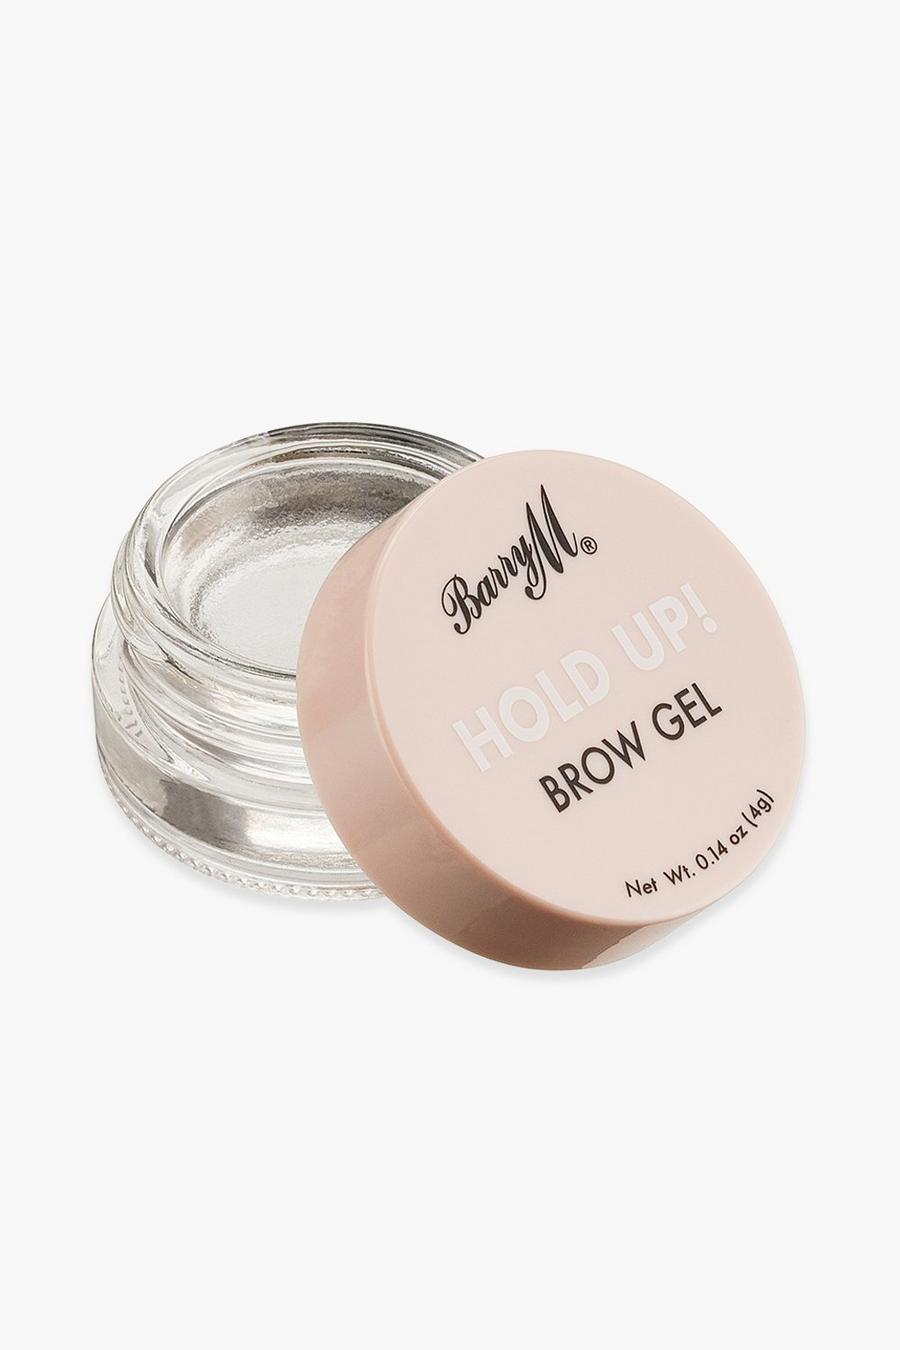 Brown marrone Barry M Hold Up! Brow Gel